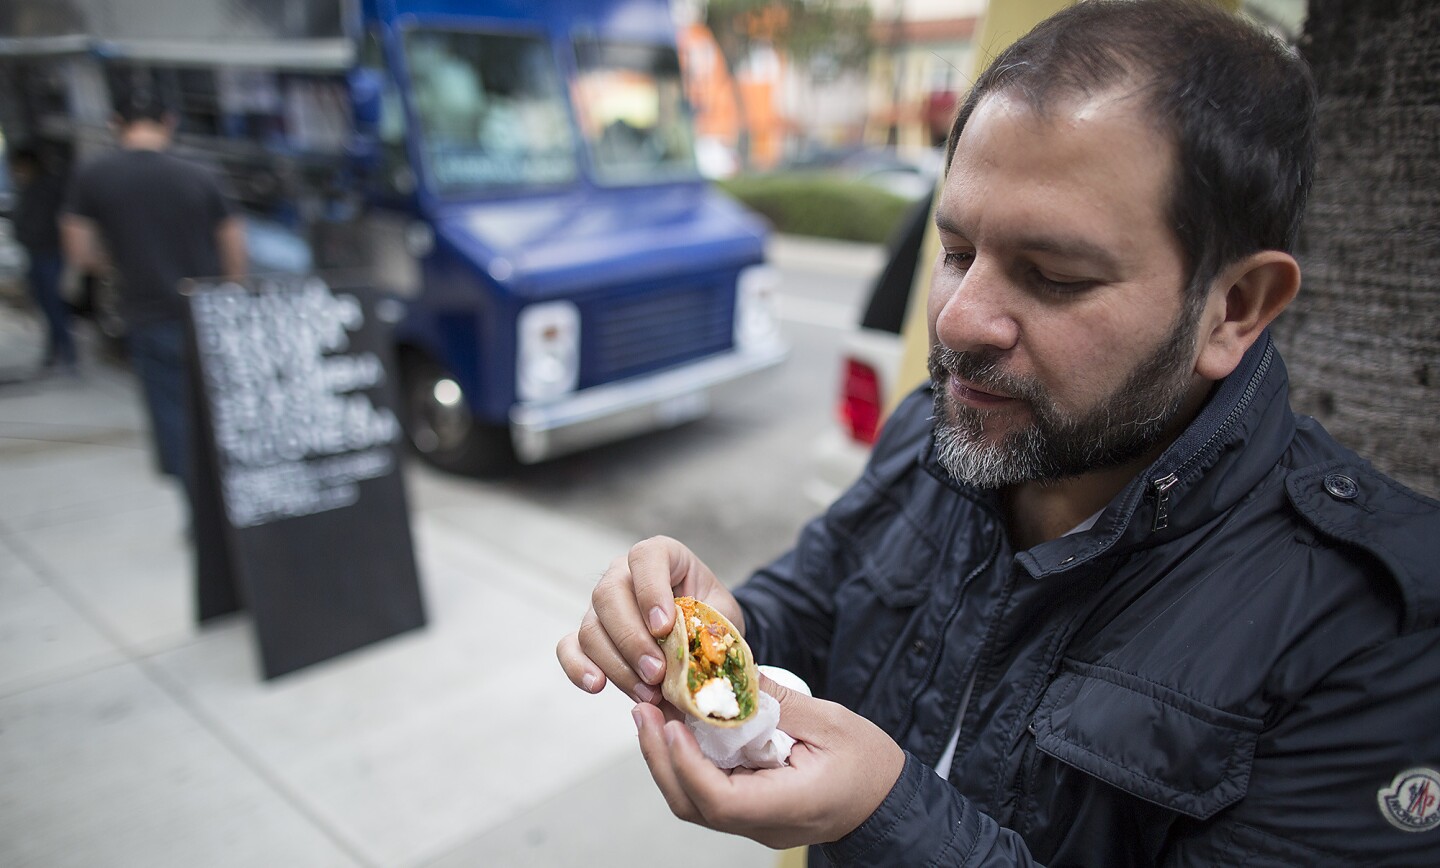 Enrique Olvera, the chef known for Pujol in Mexico City, samples some of L.A. best tacos during a visit here. He likes the cultural crossover that is taking place inside the city's tortillas: bulgogi tacos, pastrami tacos and so on. "Here you find people from everywhere with many different interests," he says. "In a way, Los Angeles is like a spice route now — a lot of people from many places."